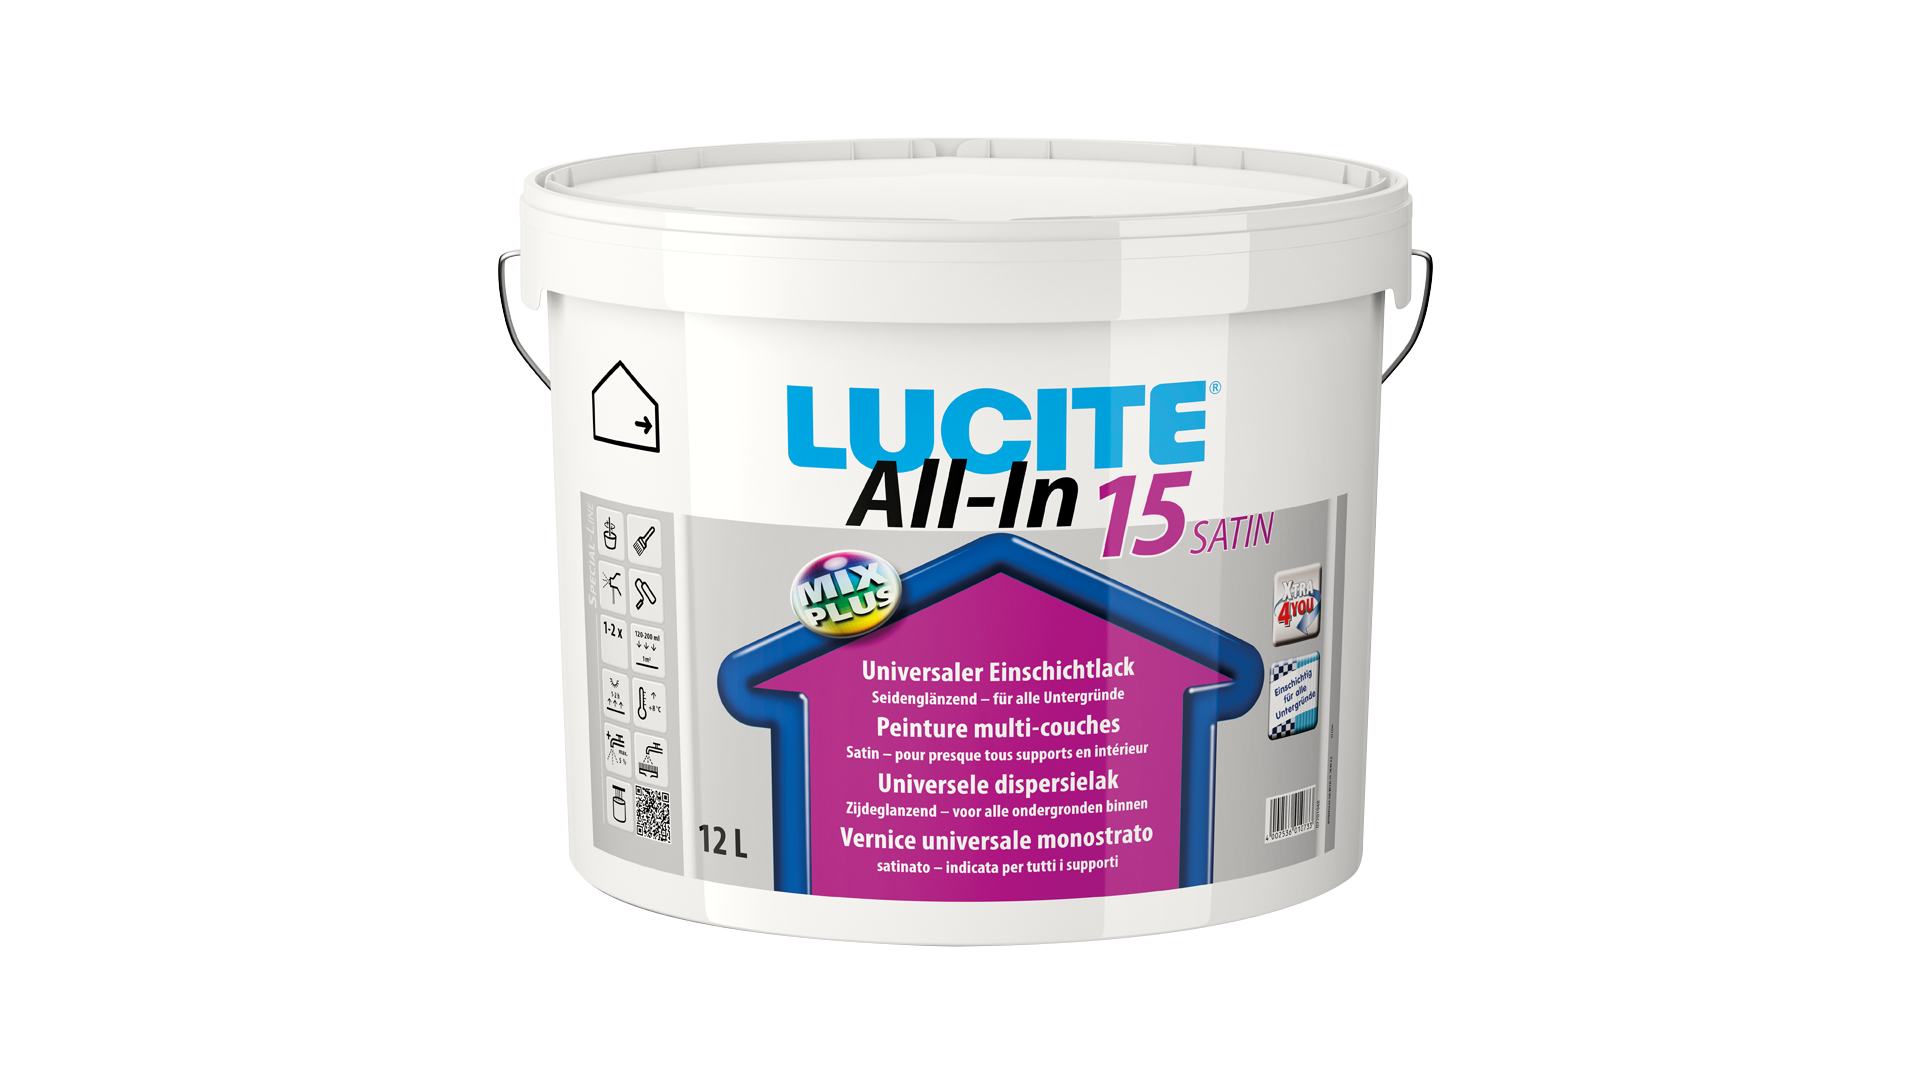 lucite-all-in-15-satin